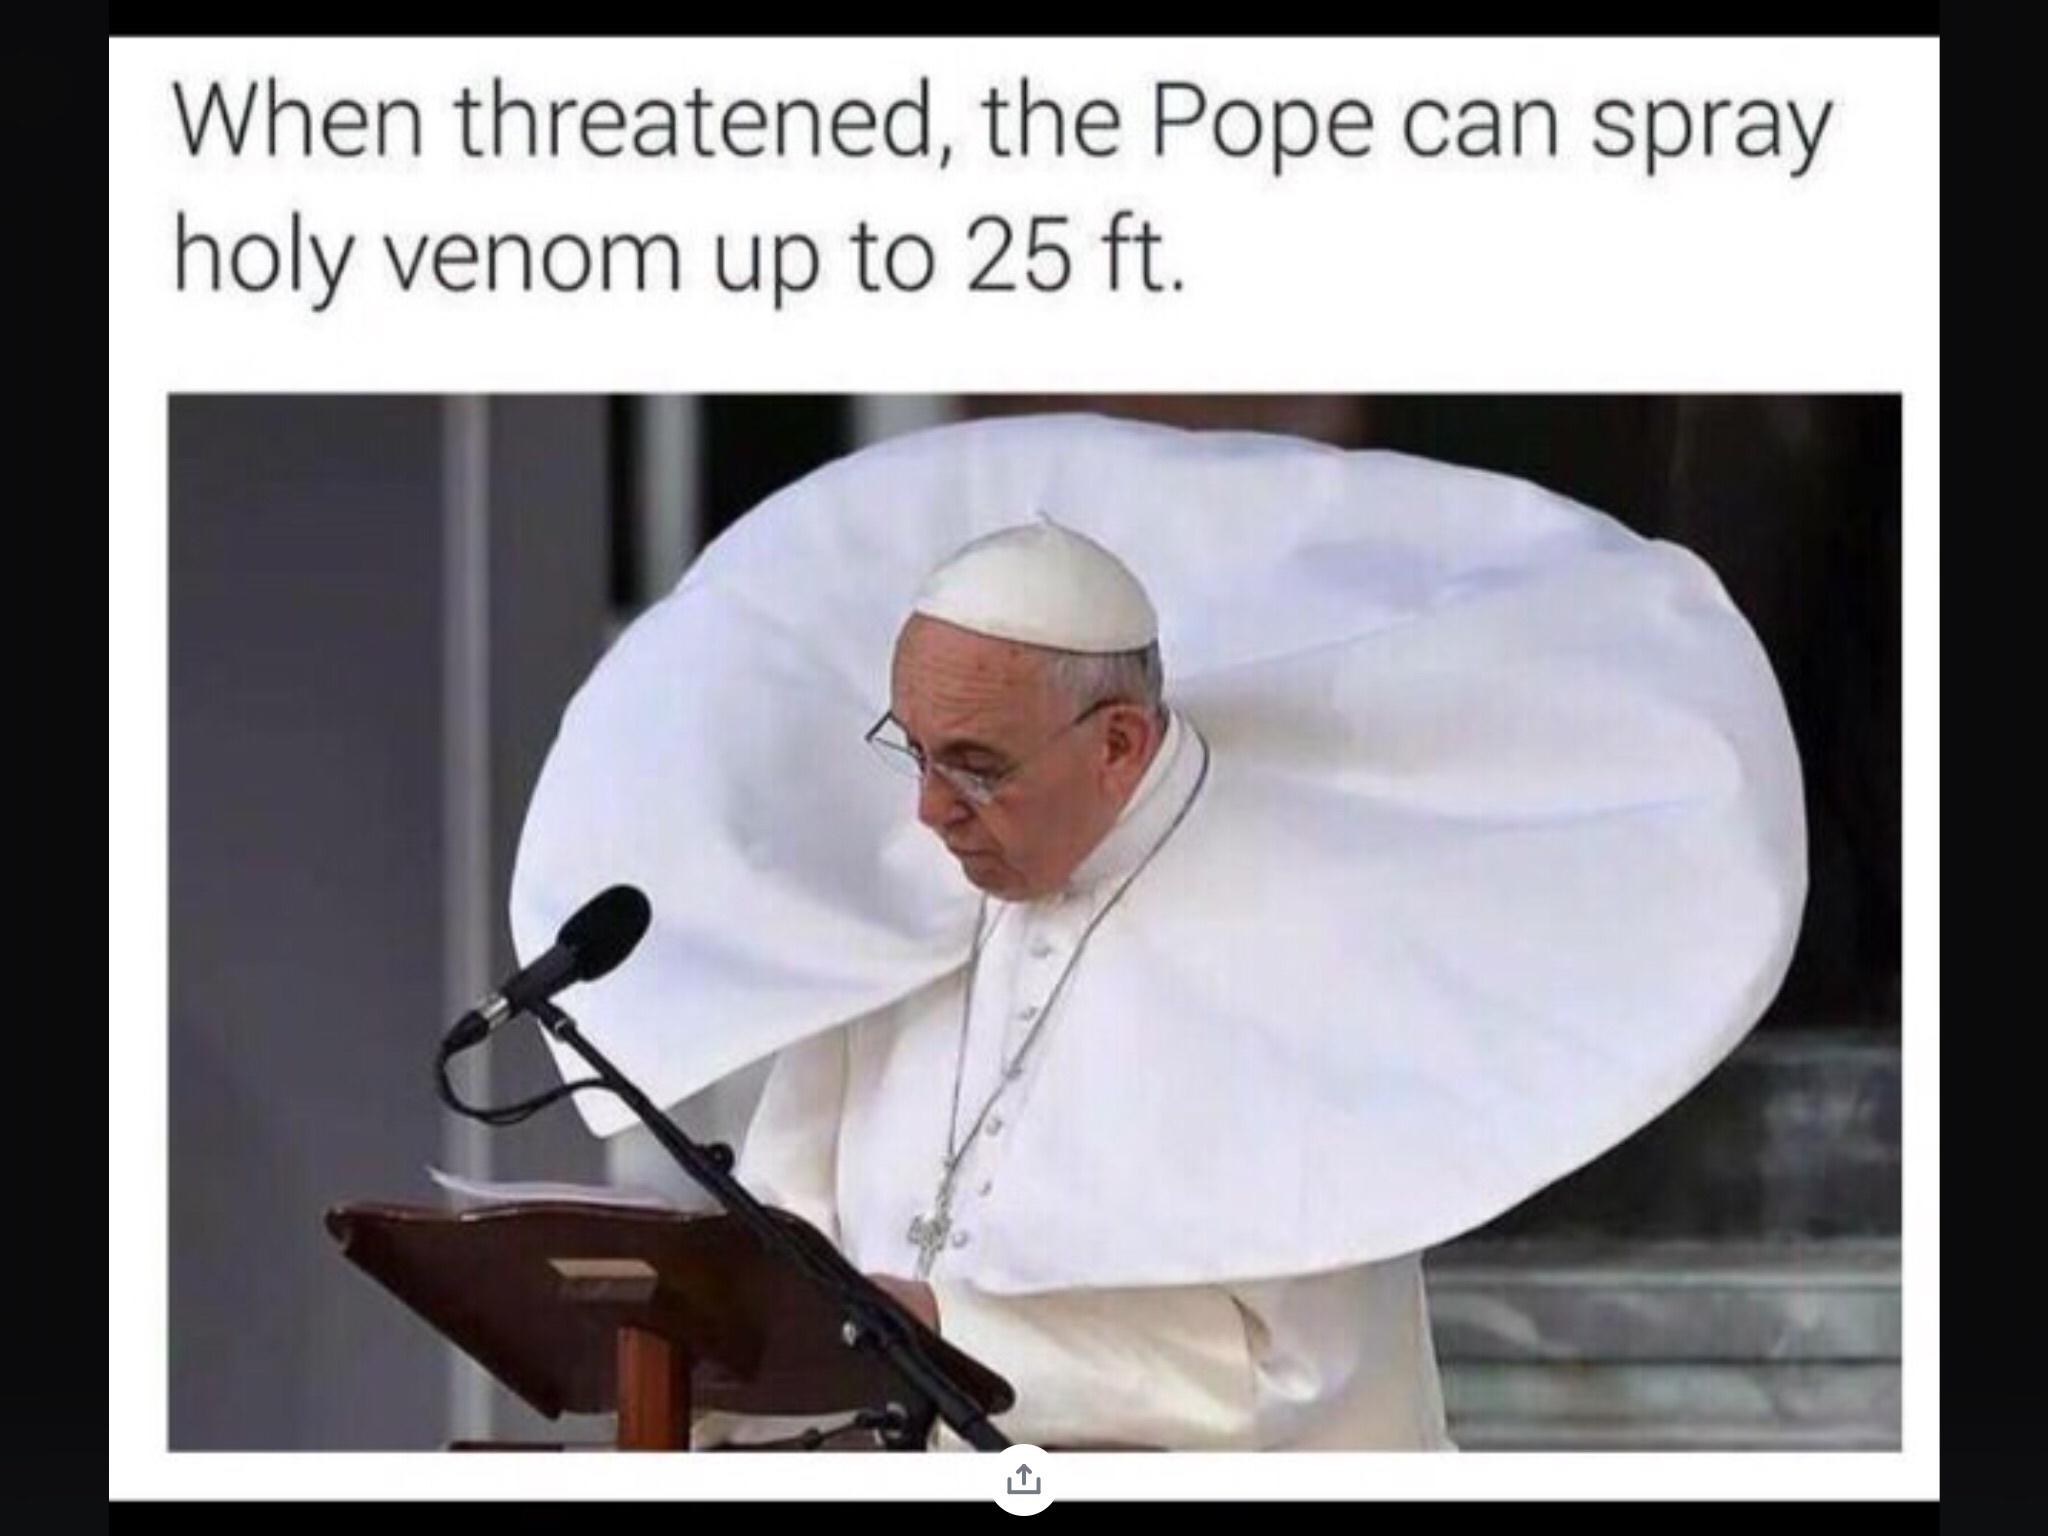 holy venom meme - When threatened, the Pope can spray holy venom up to 25 ft.